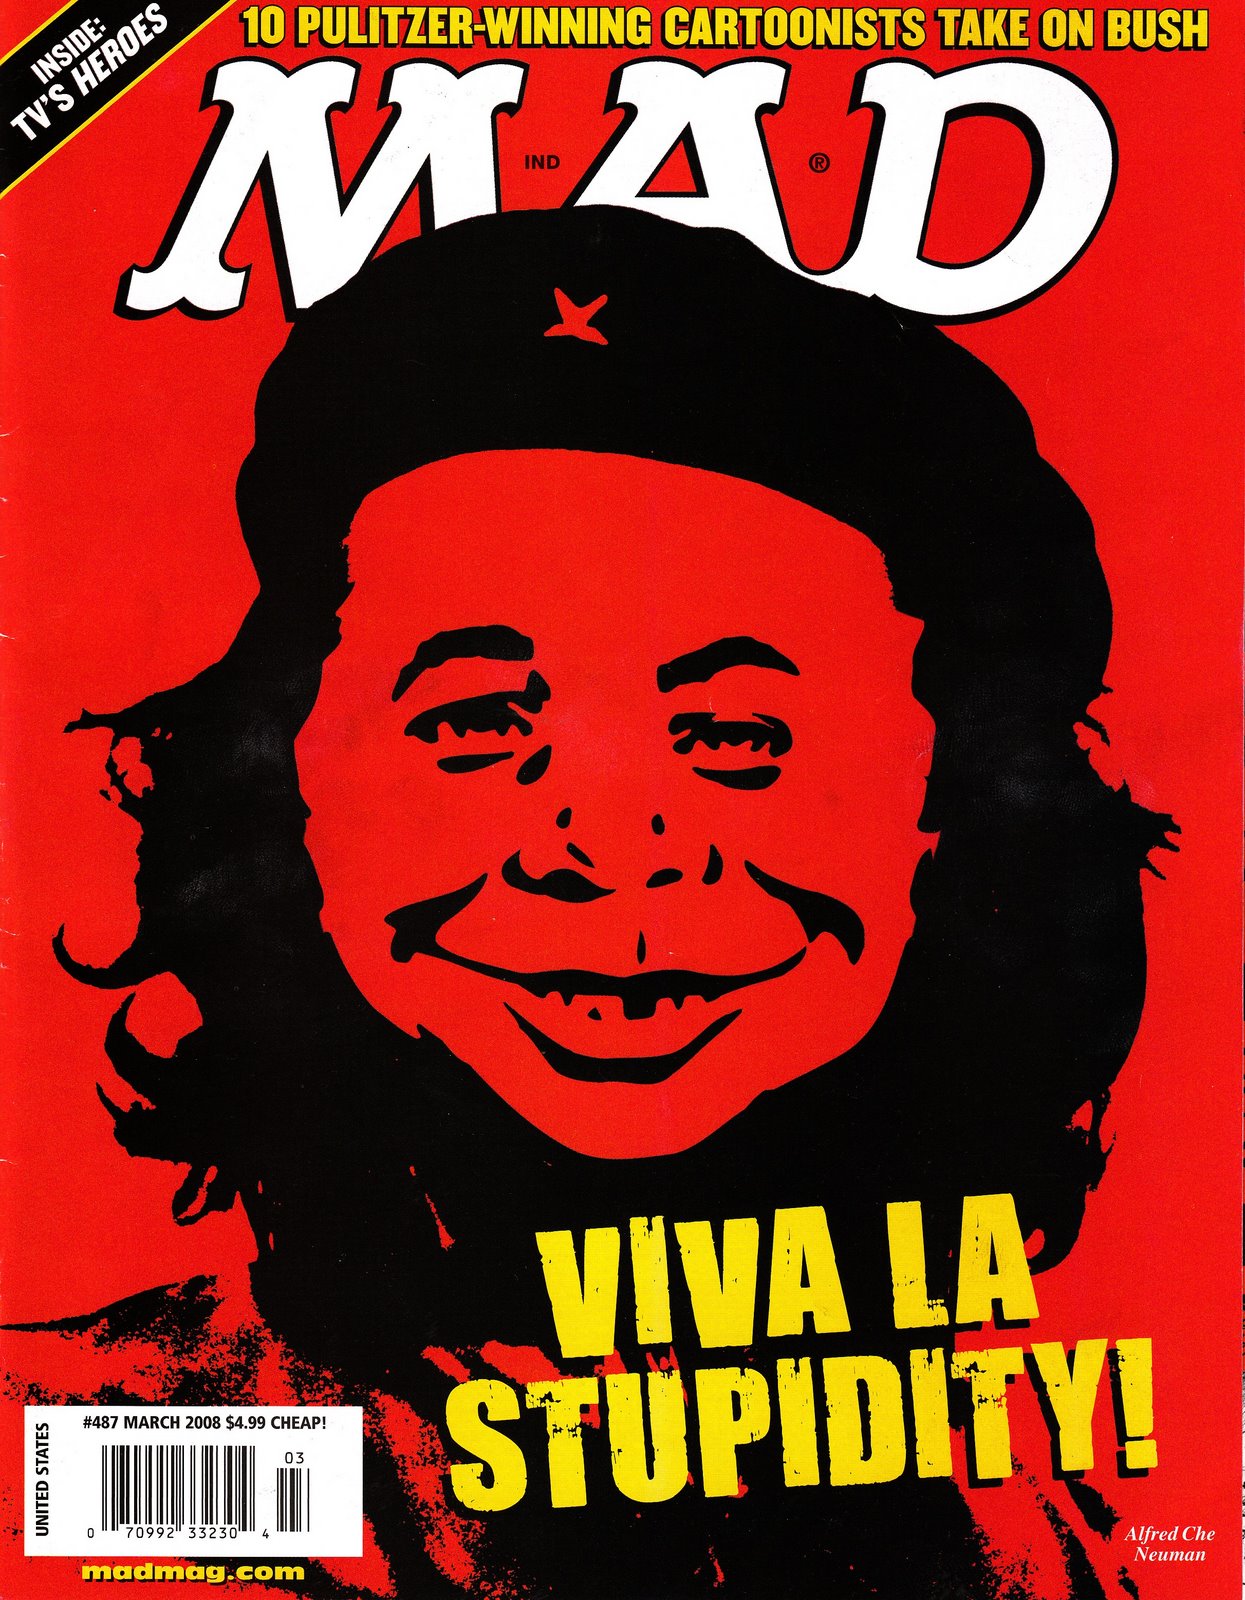 [mad+front+cover.jpg]